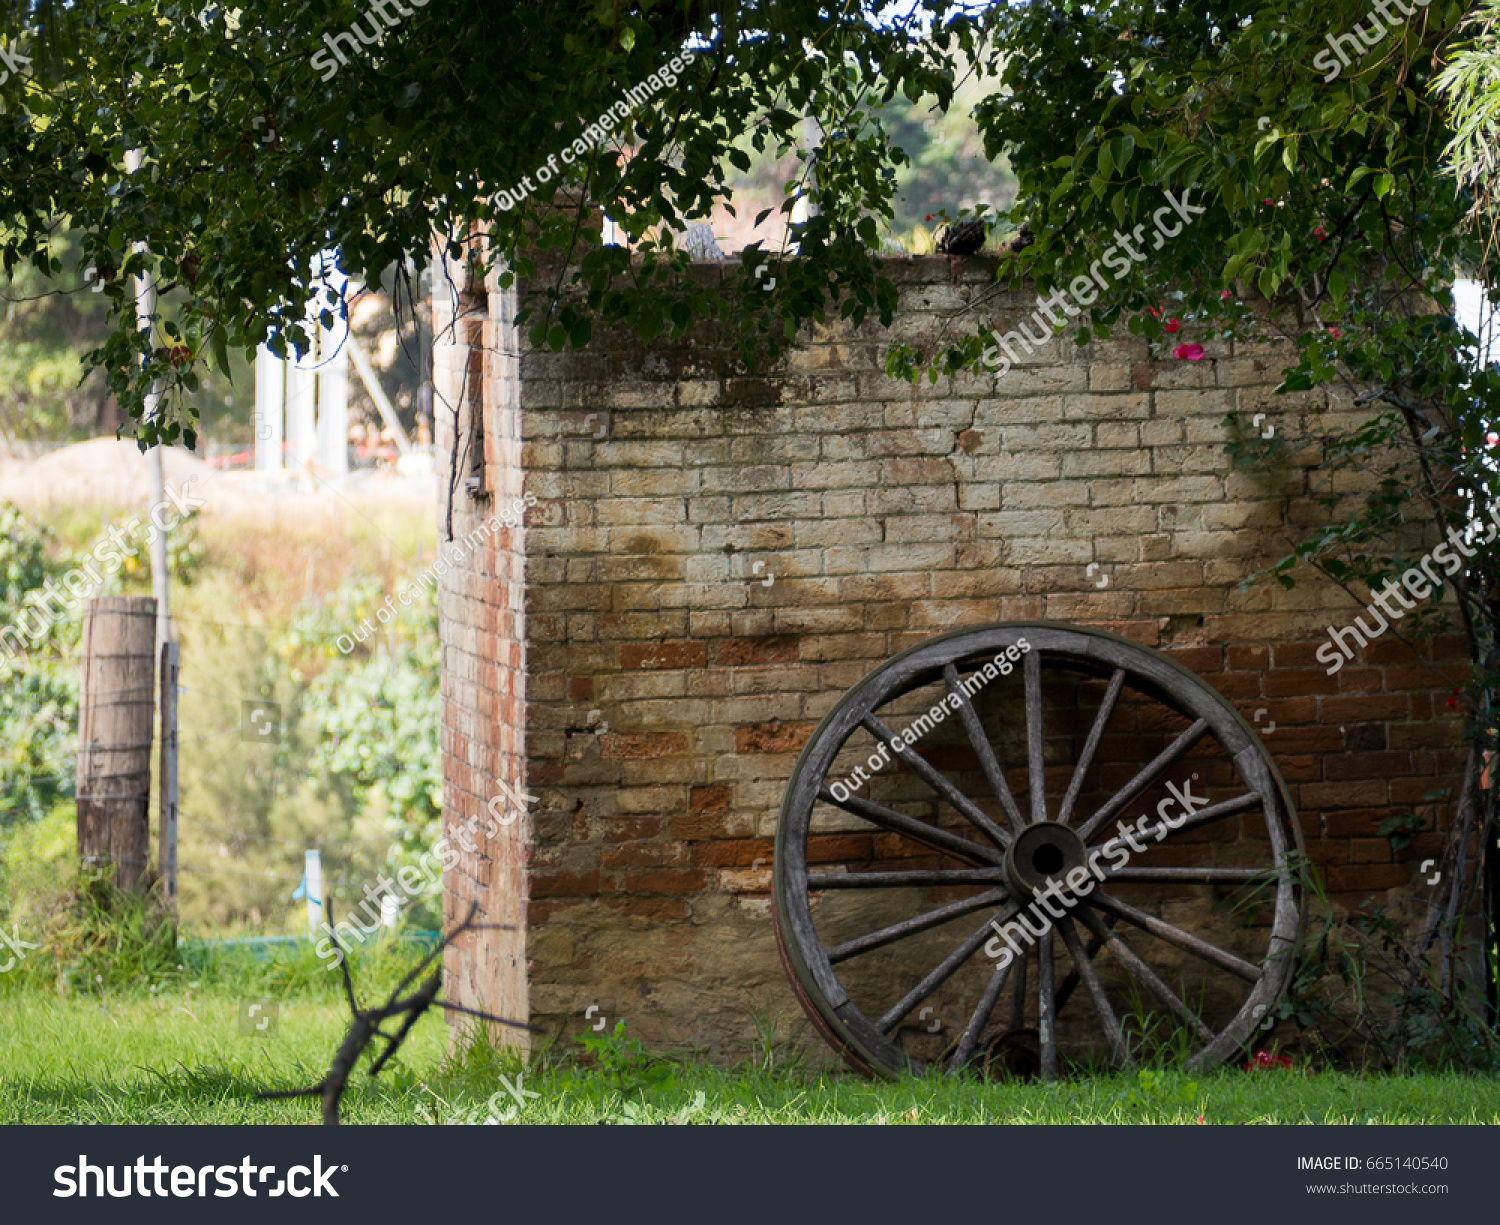 Old fashioned wagon wheel this brick wall background this Green grass and shrubs around #665140540